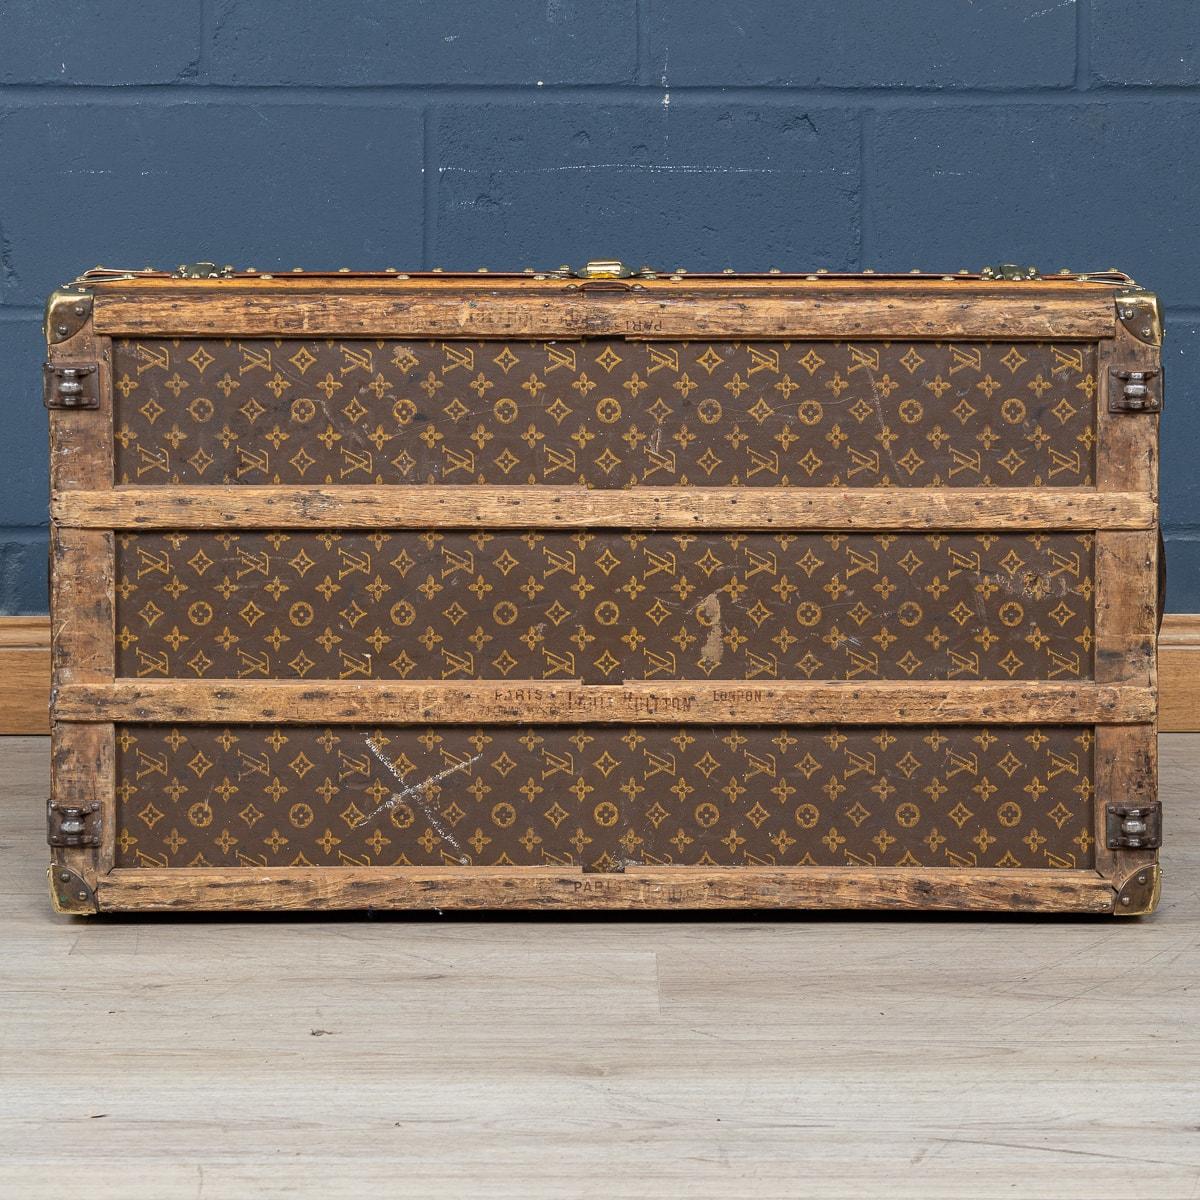 Brass 20th Century Louis Vuitton Cabin Trunk In Monogram Canvas, France c.1930 For Sale